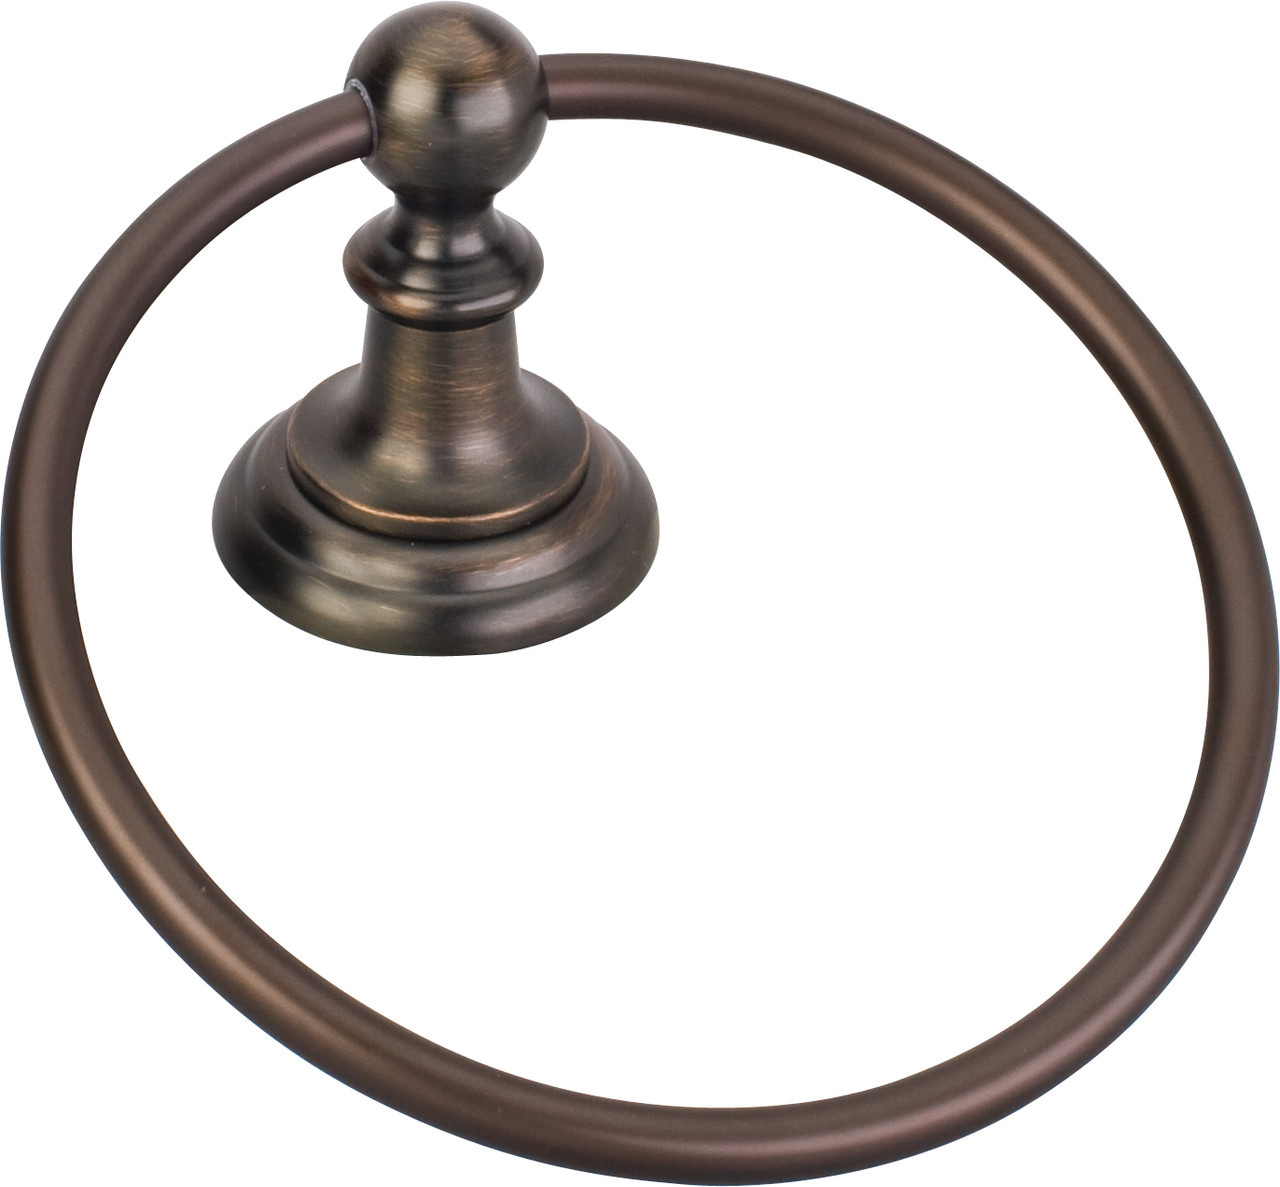 Elements Fairview Brushed Oil Rubbed Bronze Towel Ring - Retail Packaged  BHE5-06DBAC-R